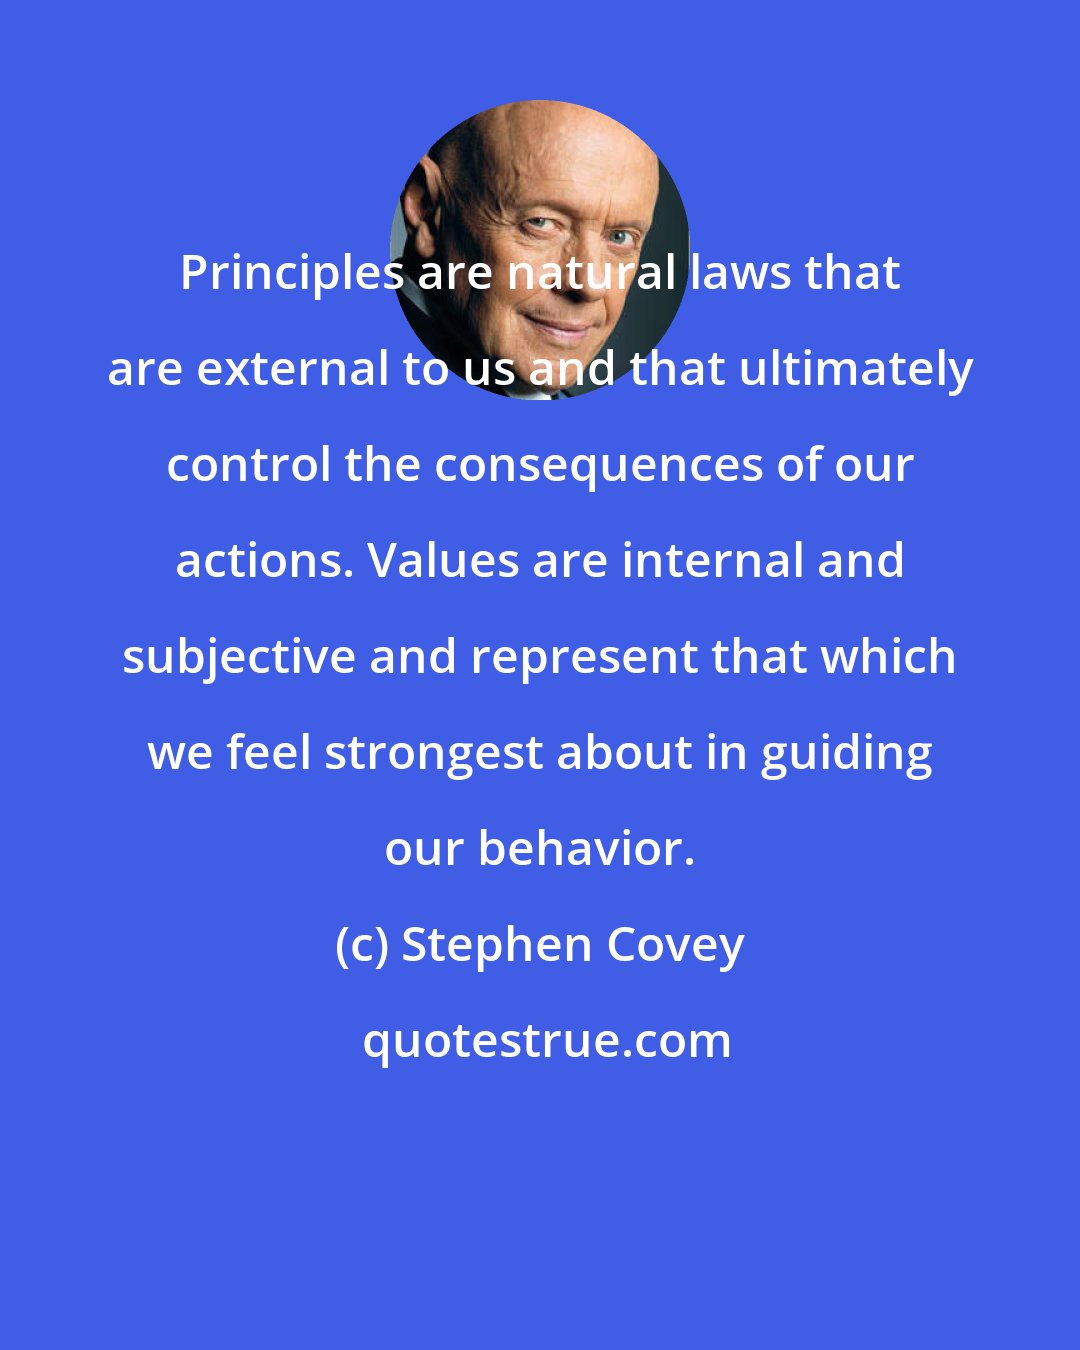 Stephen Covey: Principles are natural laws that are external to us and that ultimately control the consequences of our actions. Values are internal and subjective and represent that which we feel strongest about in guiding our behavior.